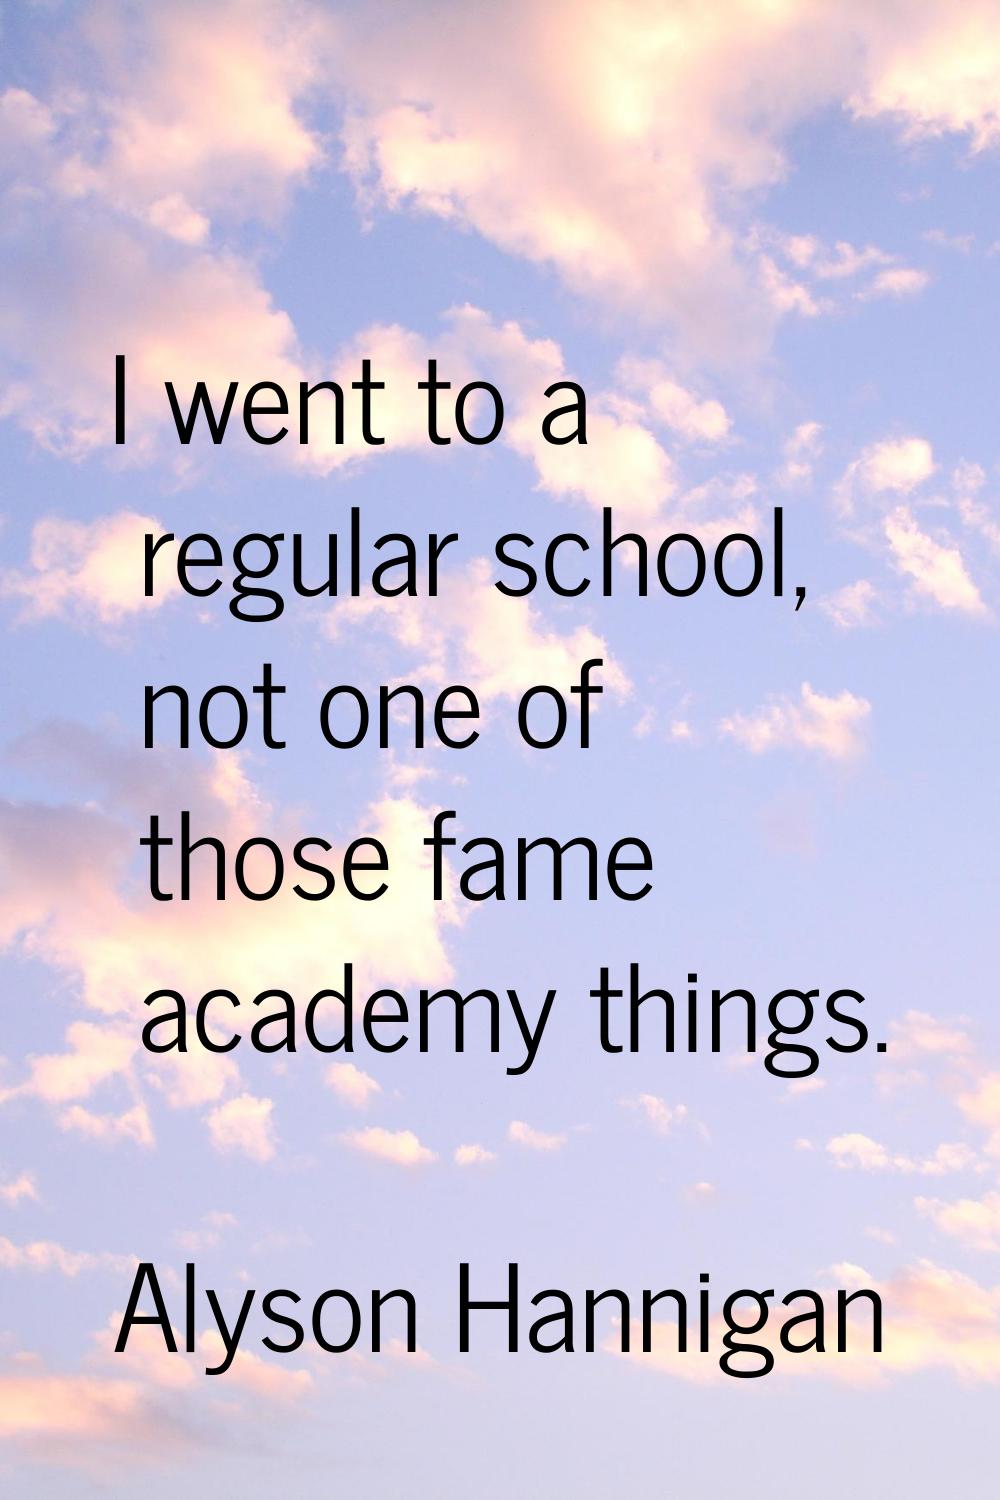 I went to a regular school, not one of those fame academy things.